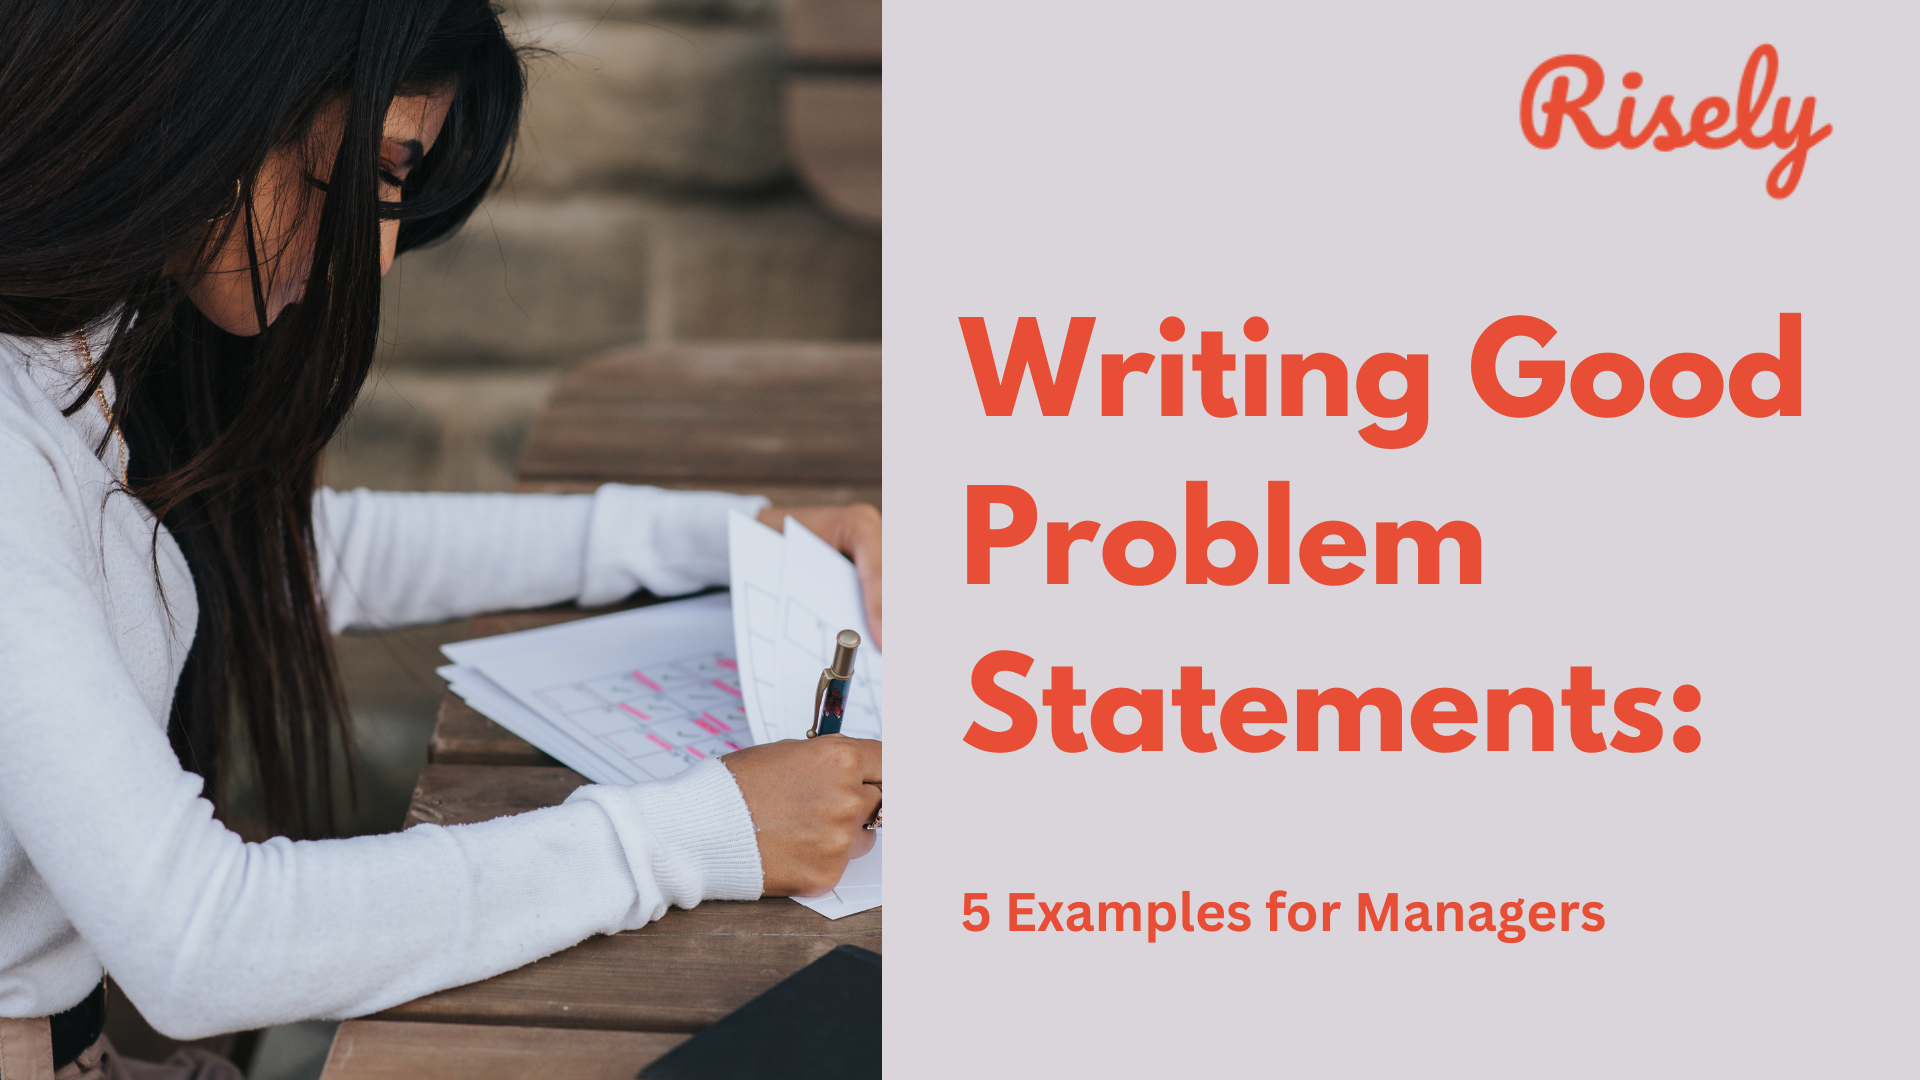 Writing Good Problem Statements: 5 Examples for Managers